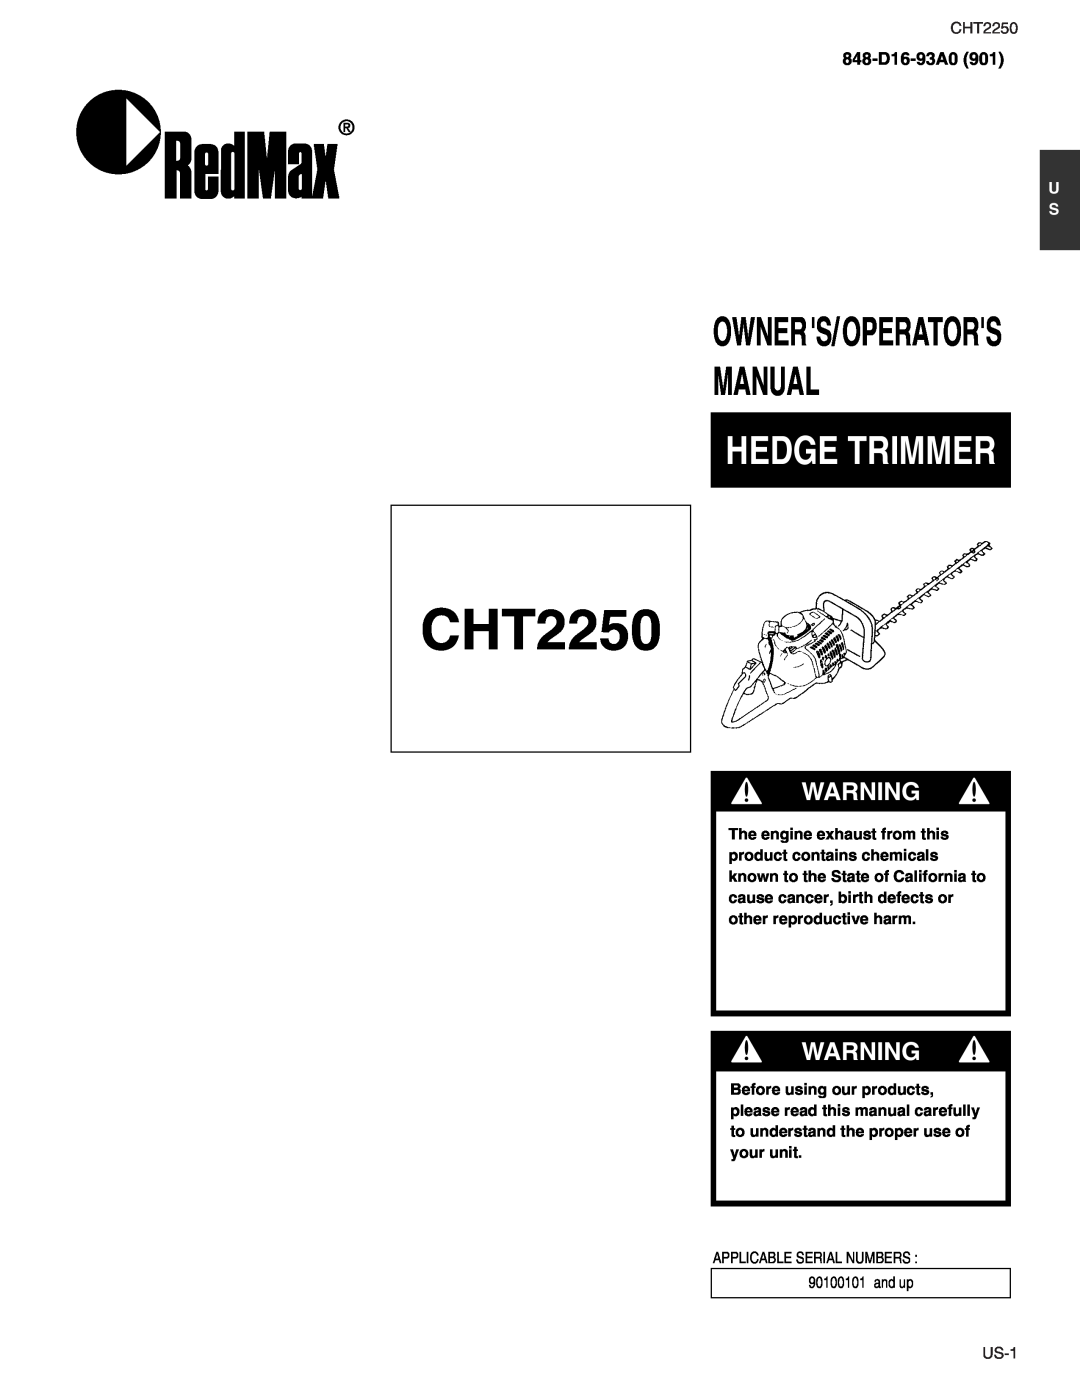 RedMax CHT2250 manual Hedge Trimmer, Manual, Owners/Operators, 848-D16-93A0 